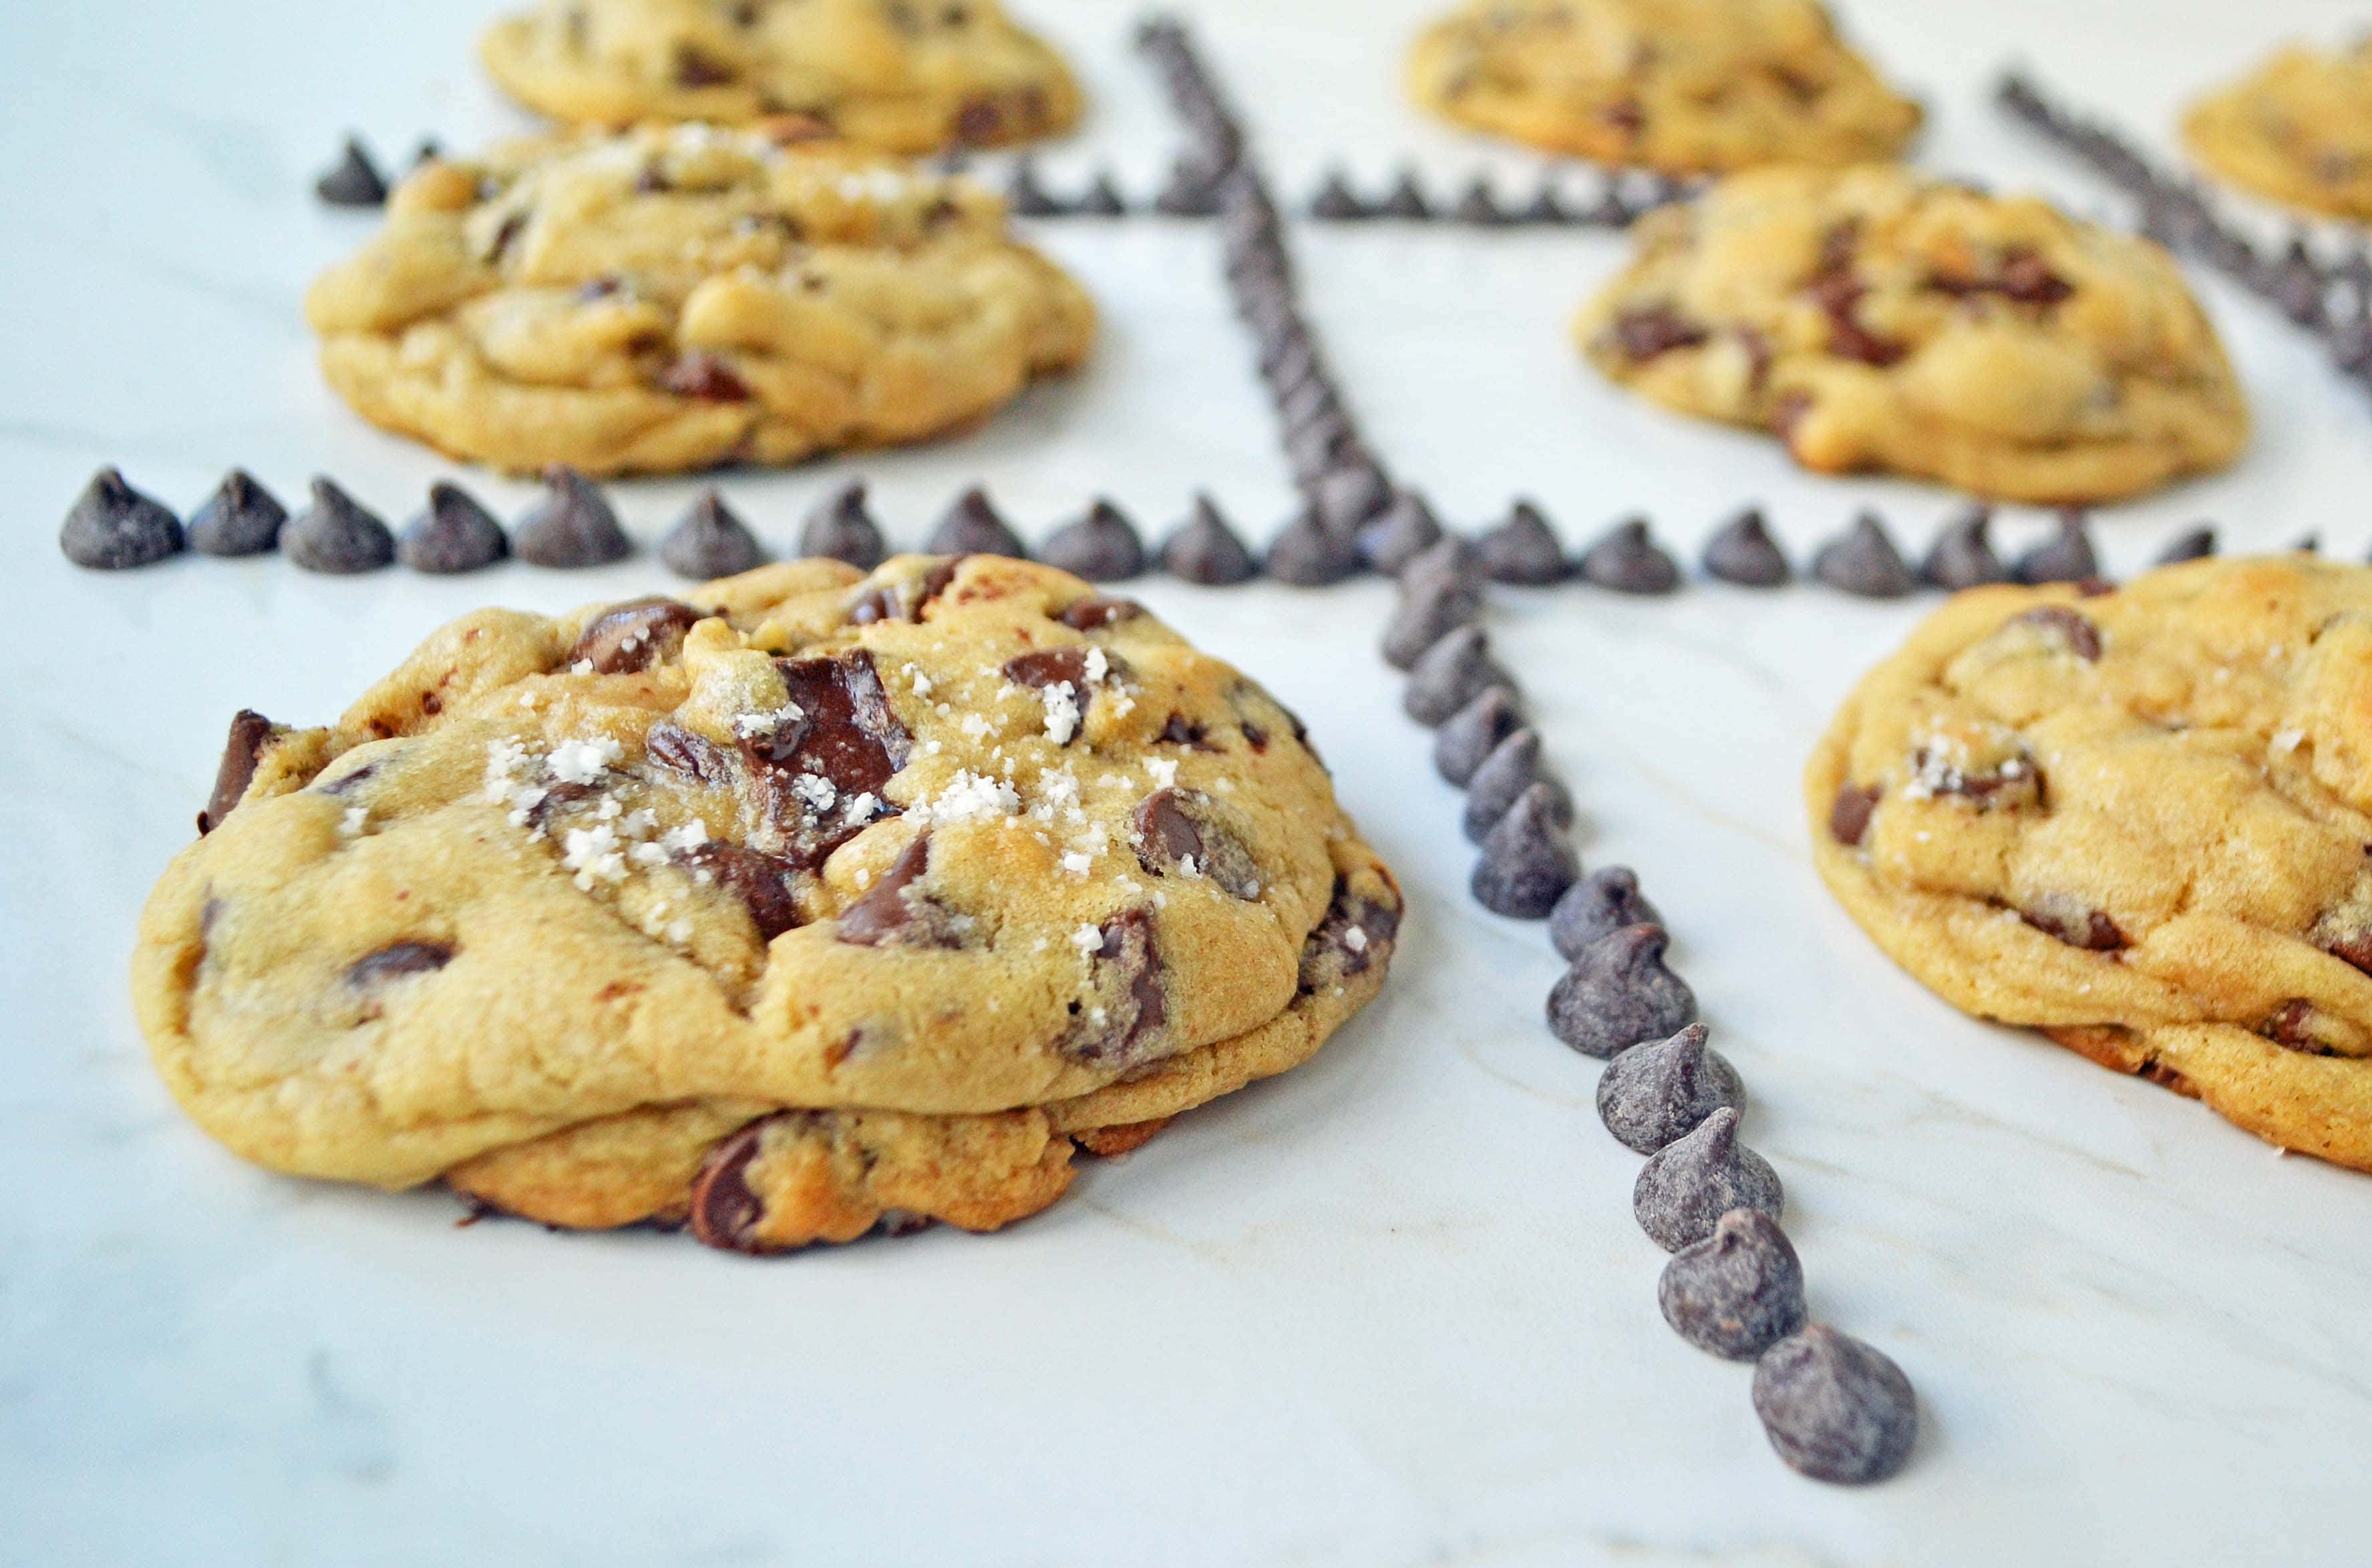 Ultimate Chocolate Chip Cookies by Modern Honey. Secrets to make perfect chocolate chip cookies.